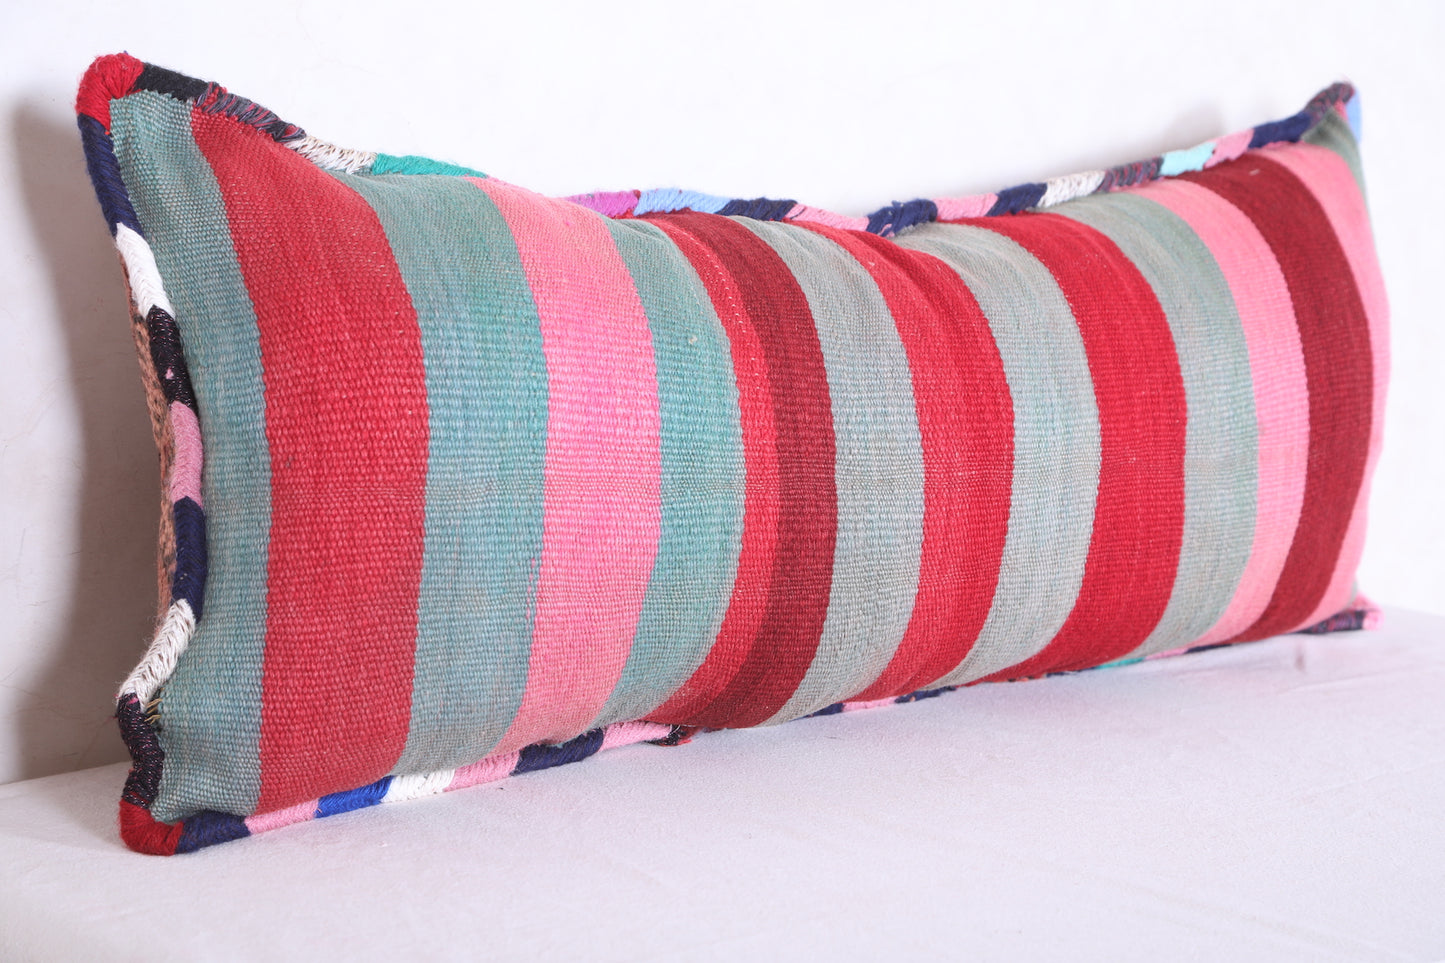 Moroccan handmade kilim pillow 15.7 INCHES X 37 INCHES